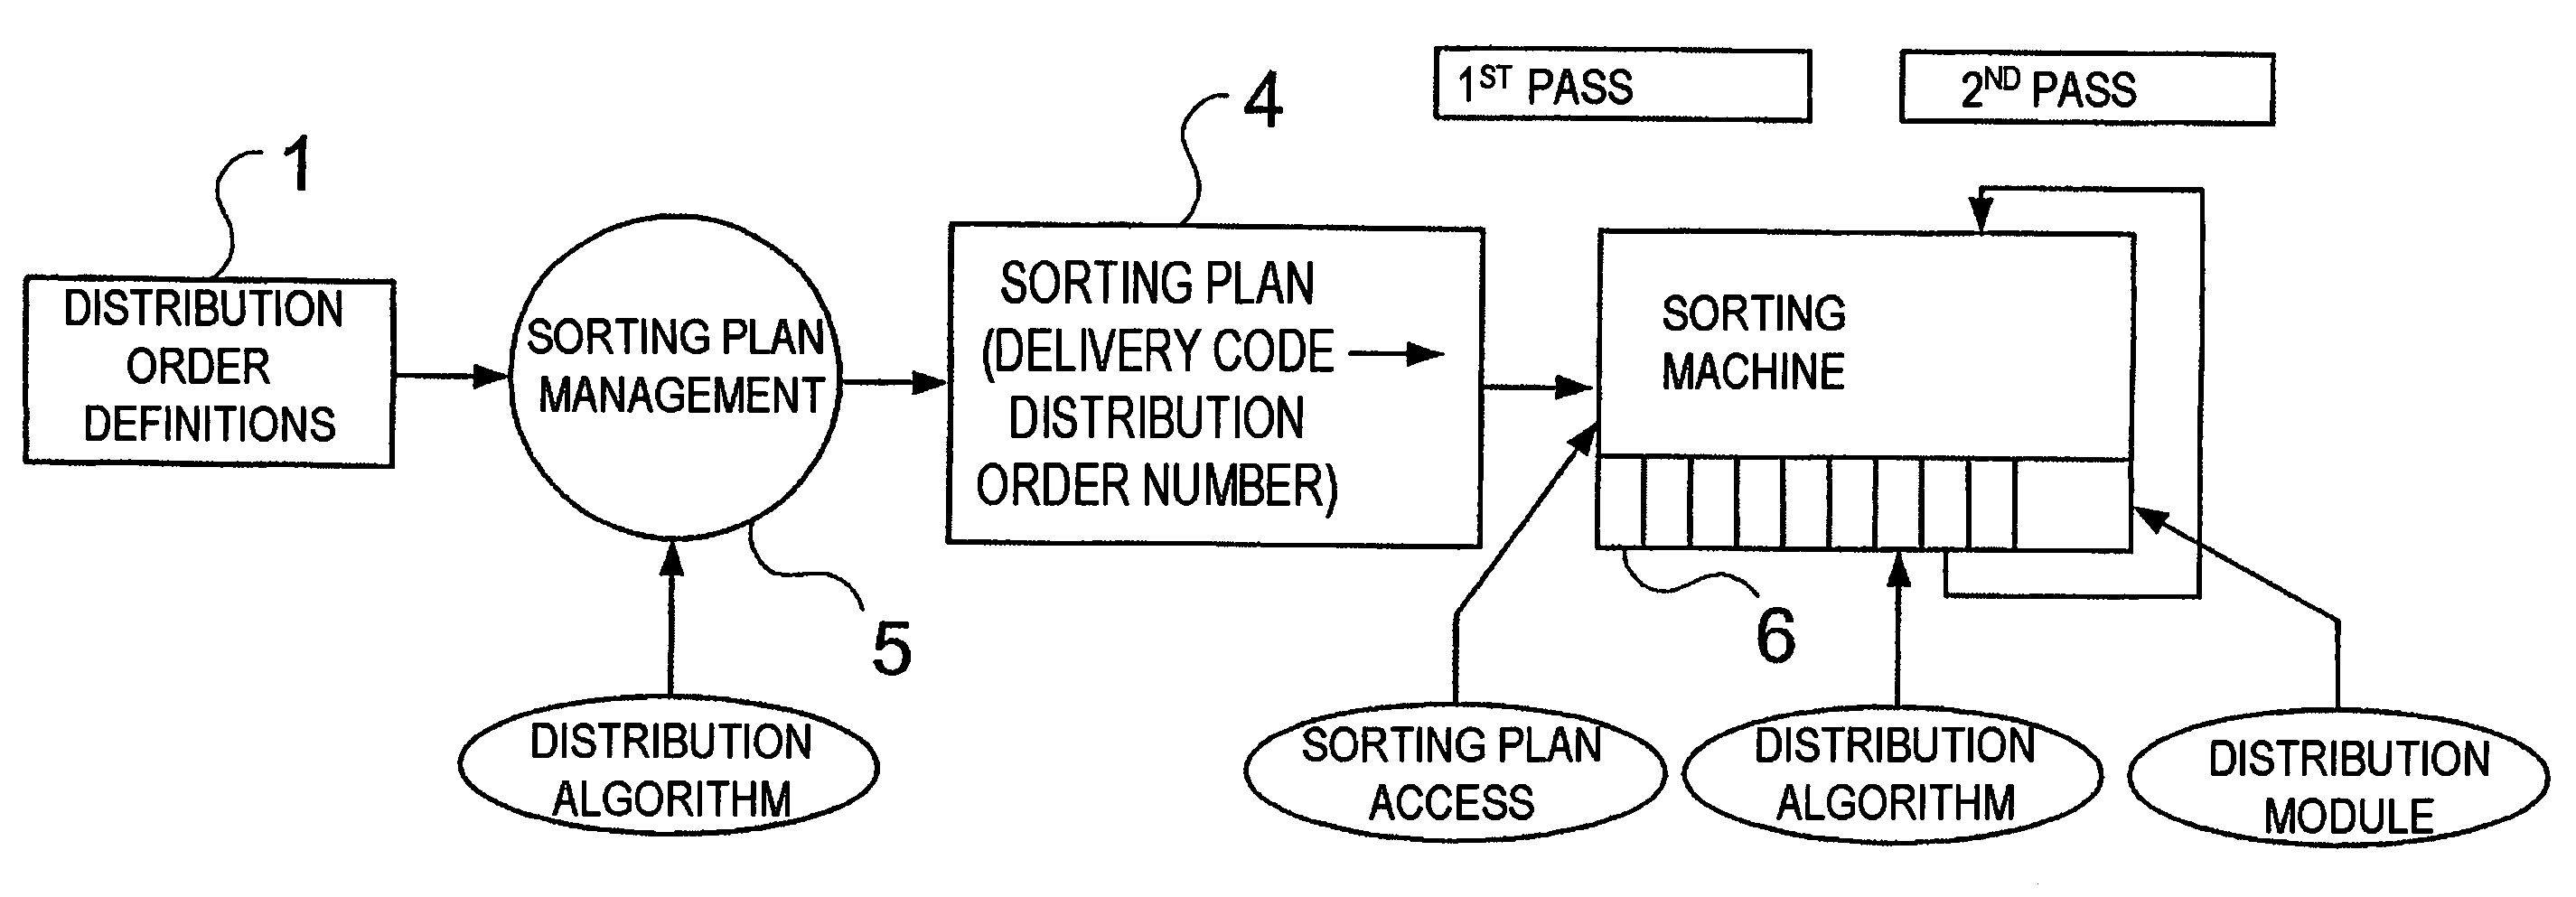 Method for sorting in a distribution order